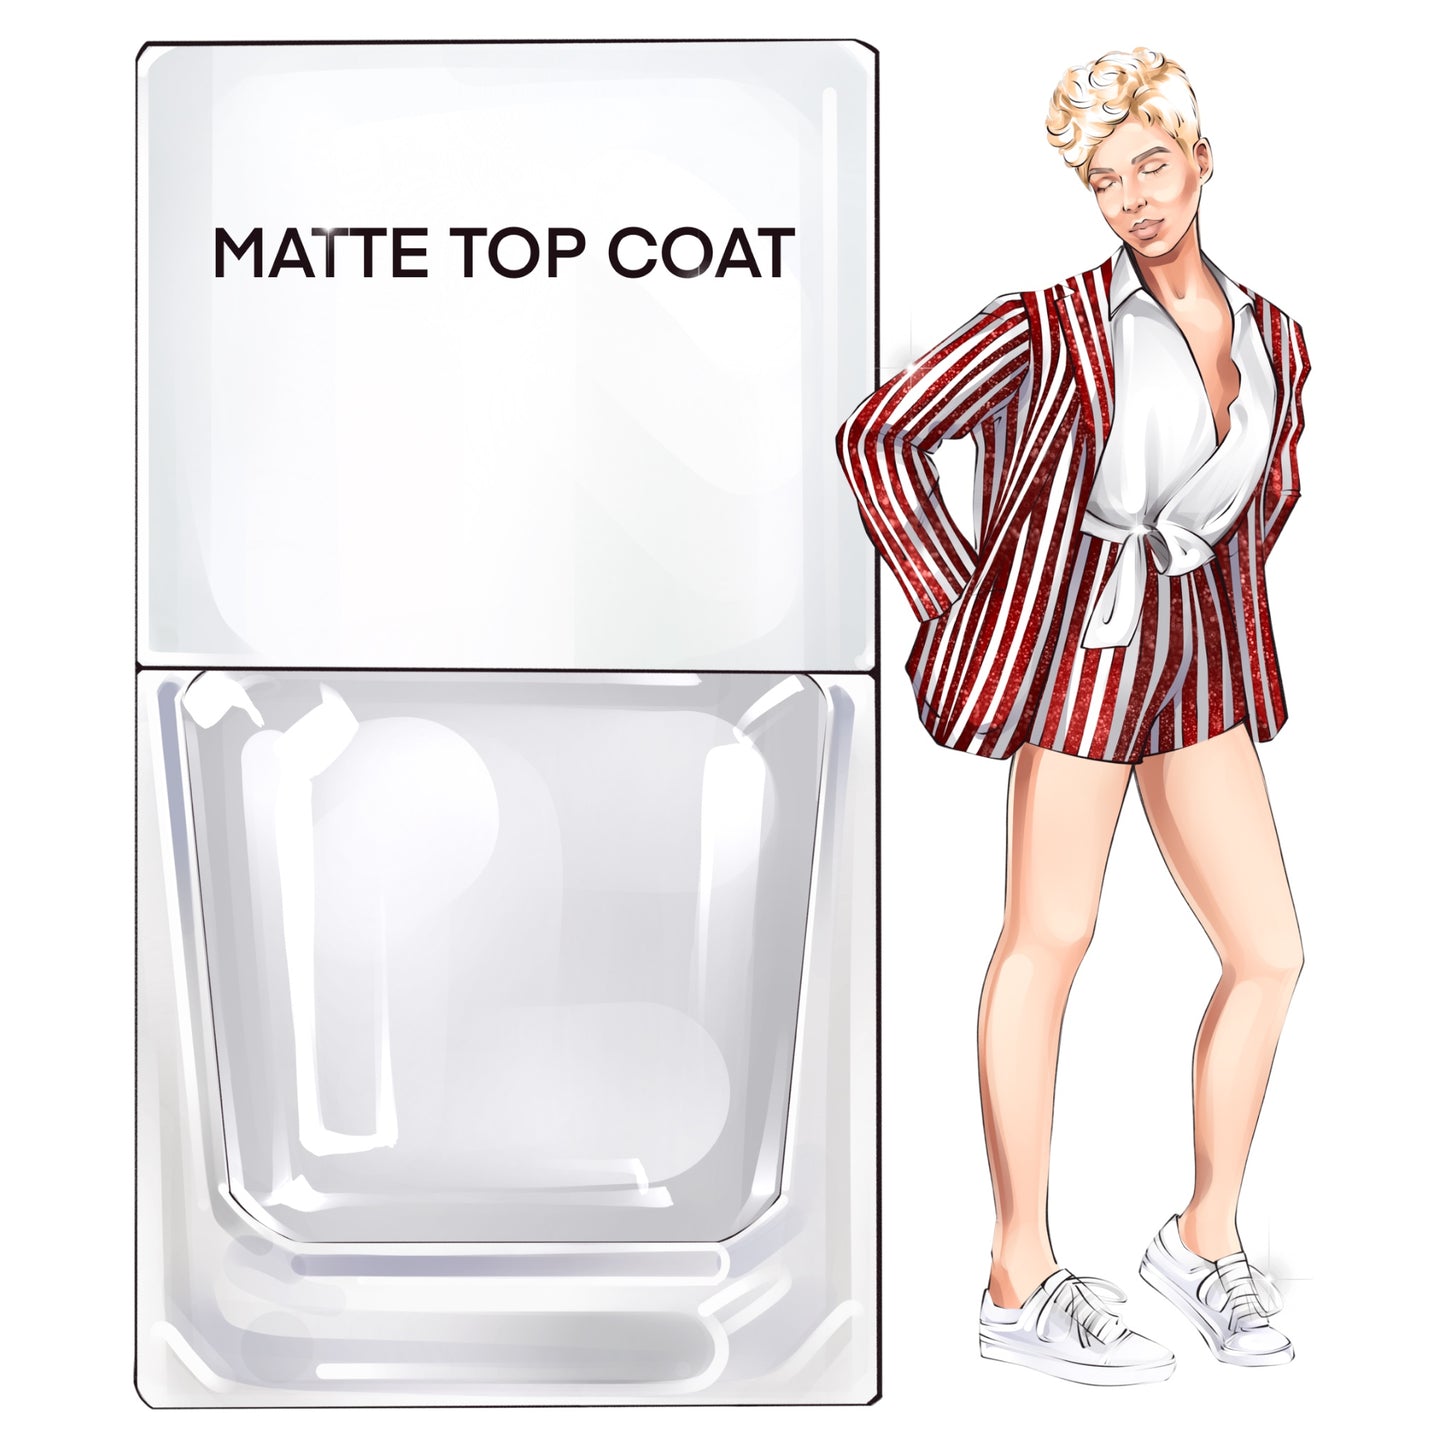 A True Nail Polish pinup for Matte Top Coat, a top coat that turns any shade matte from True Nail Polish 